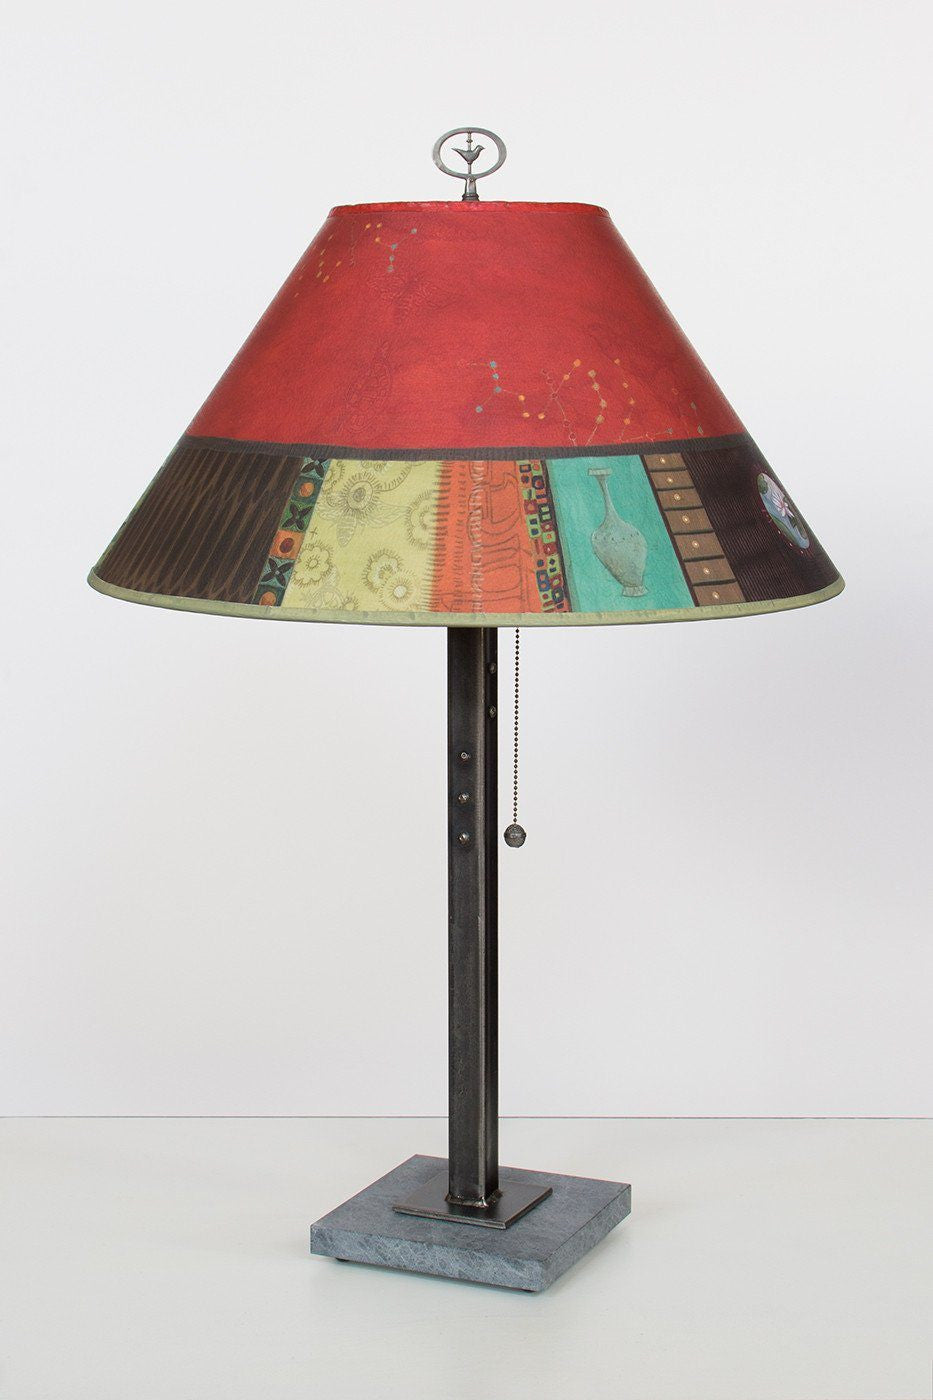 Steel Table Lamp on Italian Marble with Large Conical Shade in Red Match